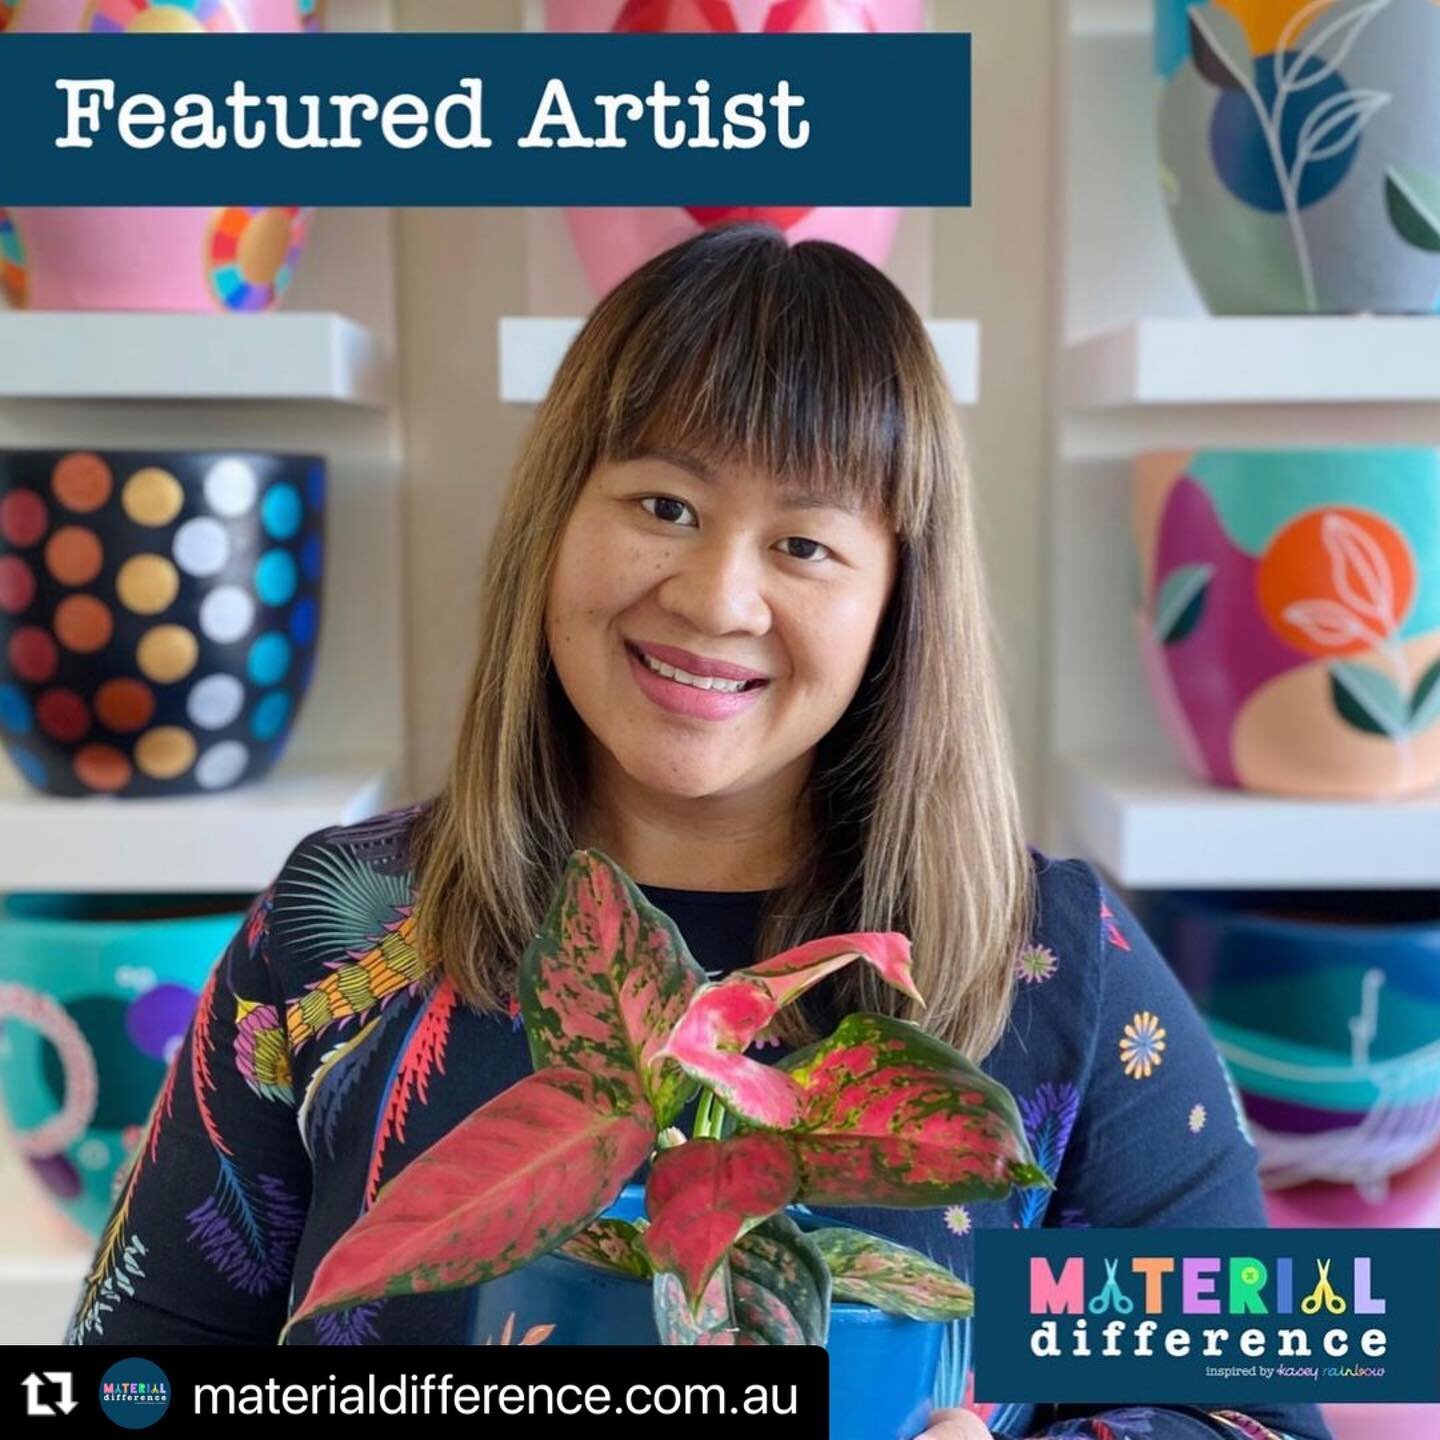 I am thrilled to share that from June you will be able to order some of my pot designs printed on FABRIC for your special maker project or business! To be working with the gorgeous Kristie and @kasey.rainbow over at @materialdifference.com.au is a dr